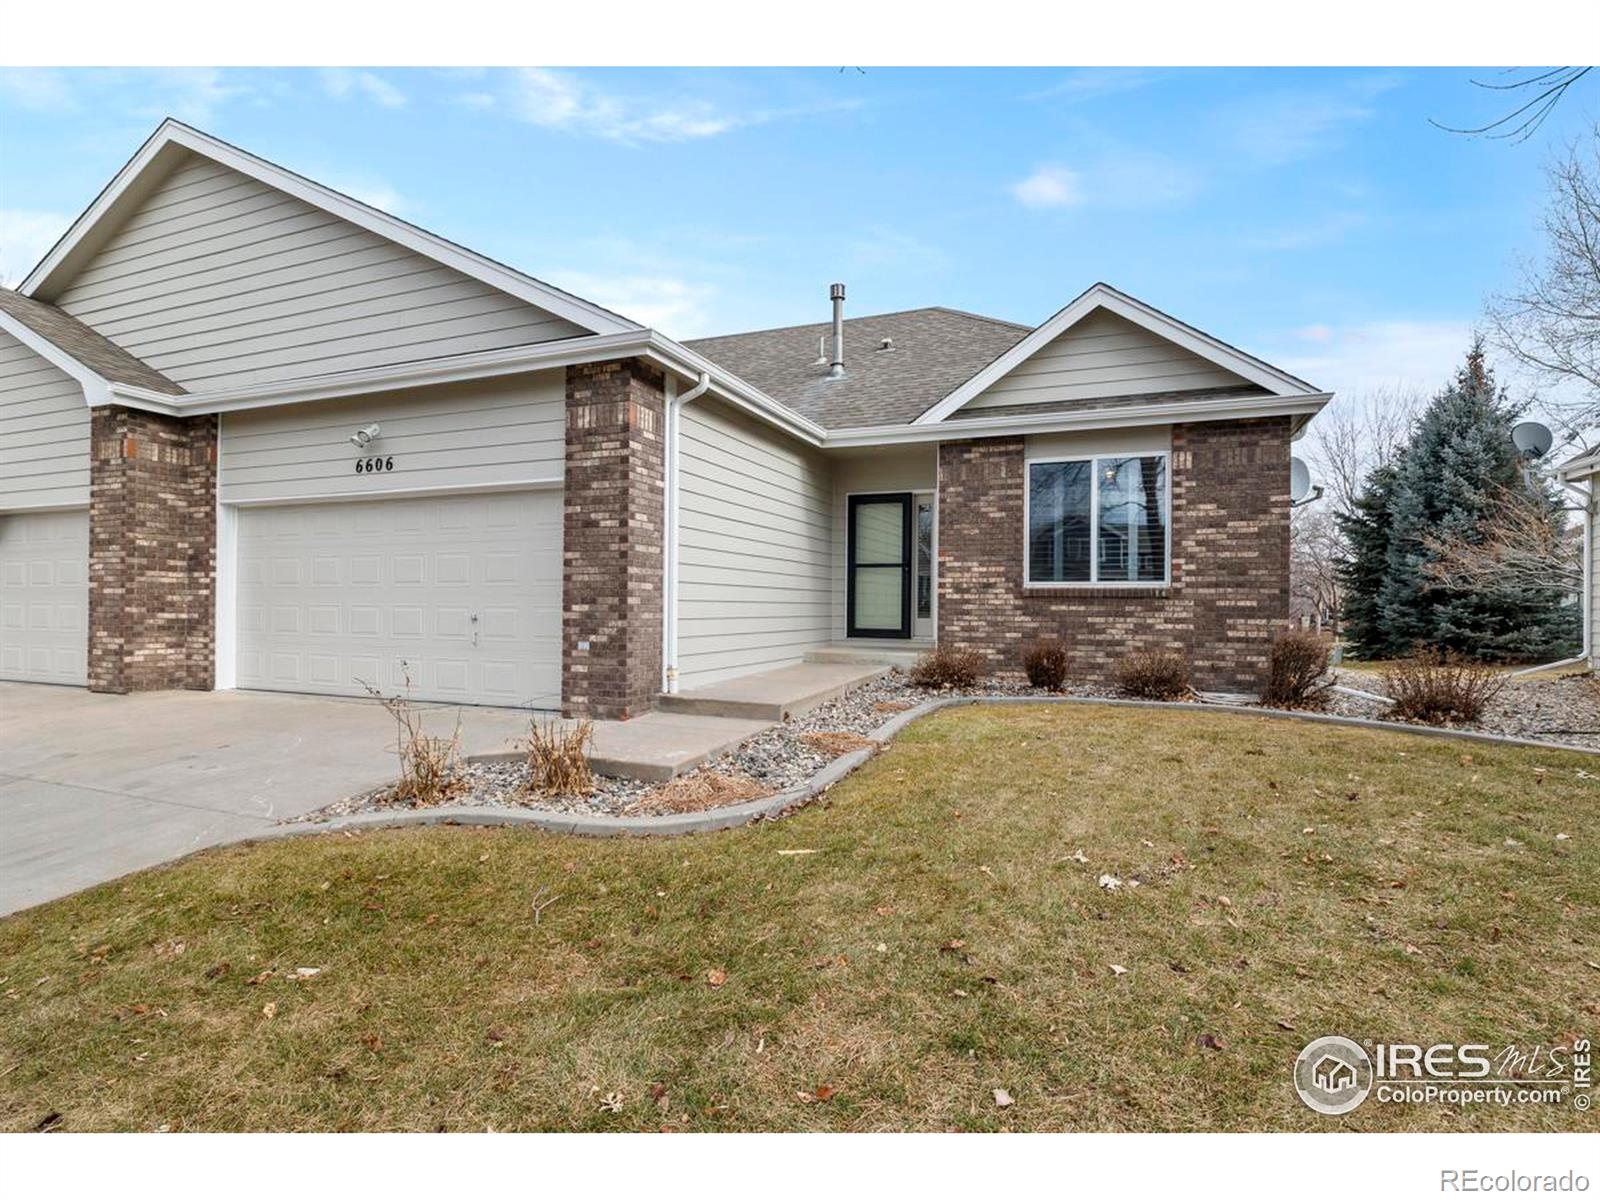 6606  Yuma Place, fort collins MLS: 4567891000818 Beds: 2 Baths: 2 Price: $440,000